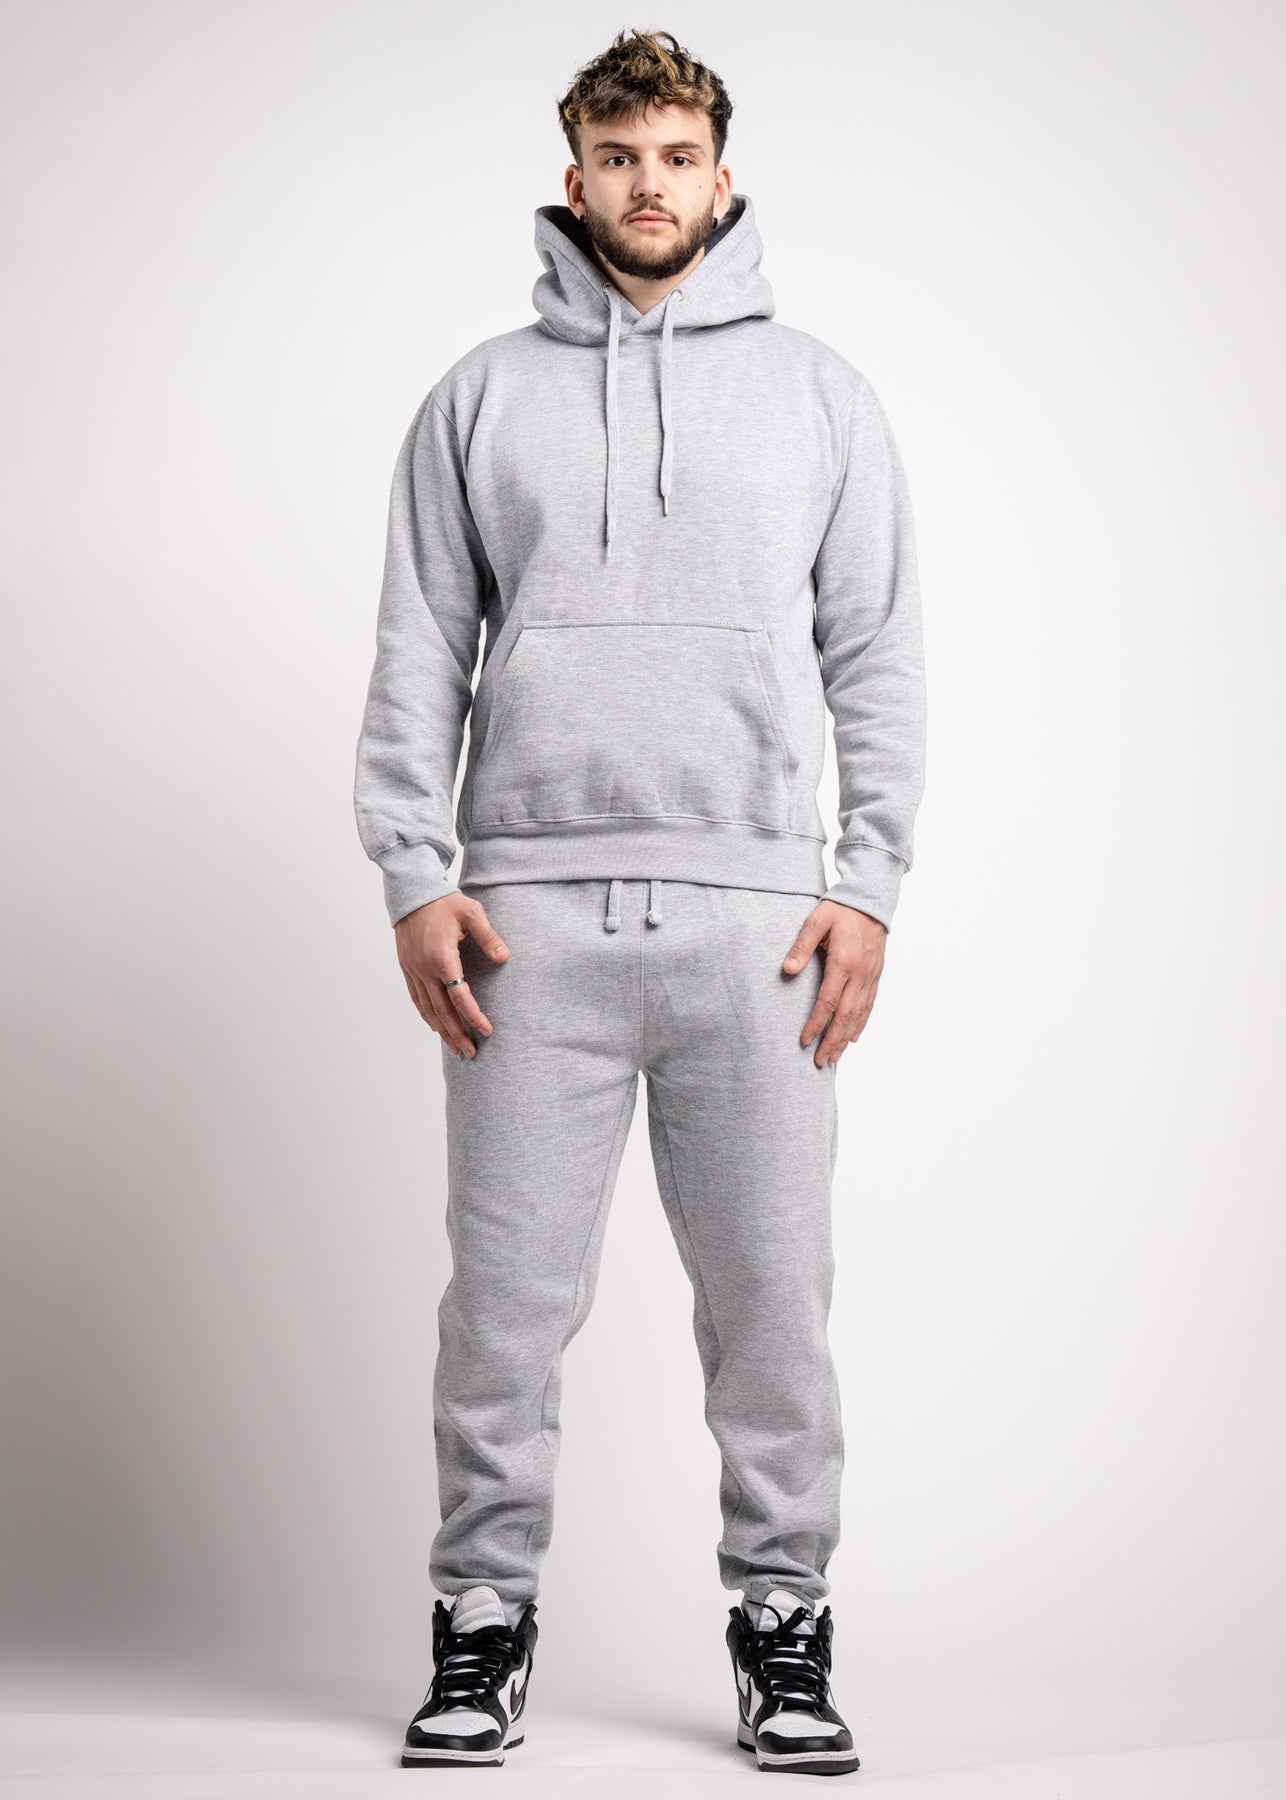 Fleece Sweatsuit – Cre8tive Tees and More